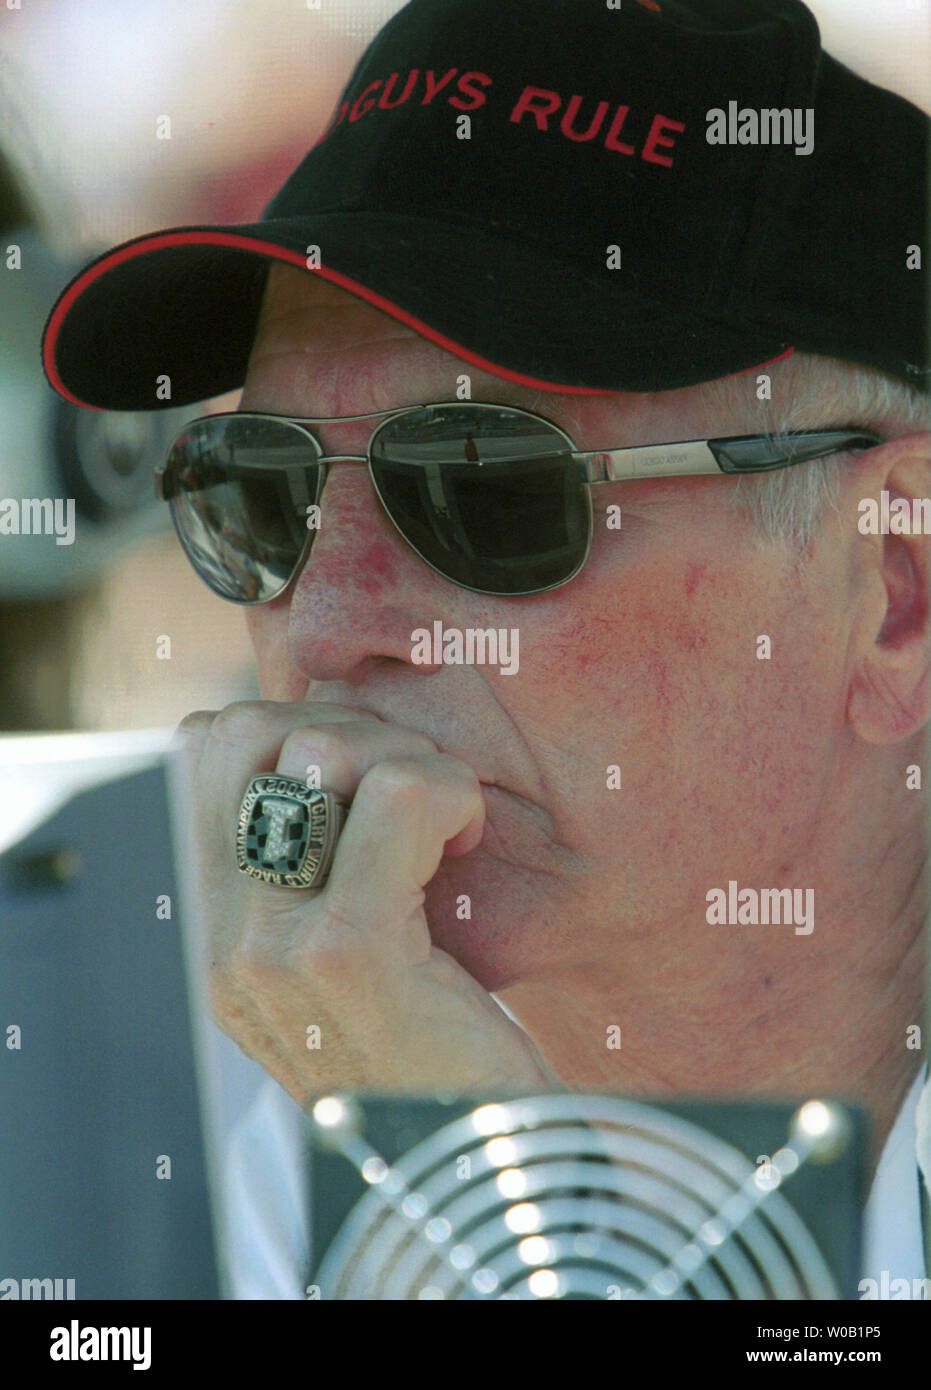 https://c8.alamy.com/comp/W0B1P5/actor-paul-newman-with-pit-crew-watches-a-computer-screen-displaying-data-on-his-driver-champ-car-series-points-leader-frenchman-sebastien-bourdais-of-team-newman-haas-who-finished-in-third-position-for-tomorrows-championship-race-after-the-second-day-of-qualifying-at-vancouvers-concorde-pacific-place-july-24-2004-upi-photoheinz-ruckemann-W0B1P5.jpg